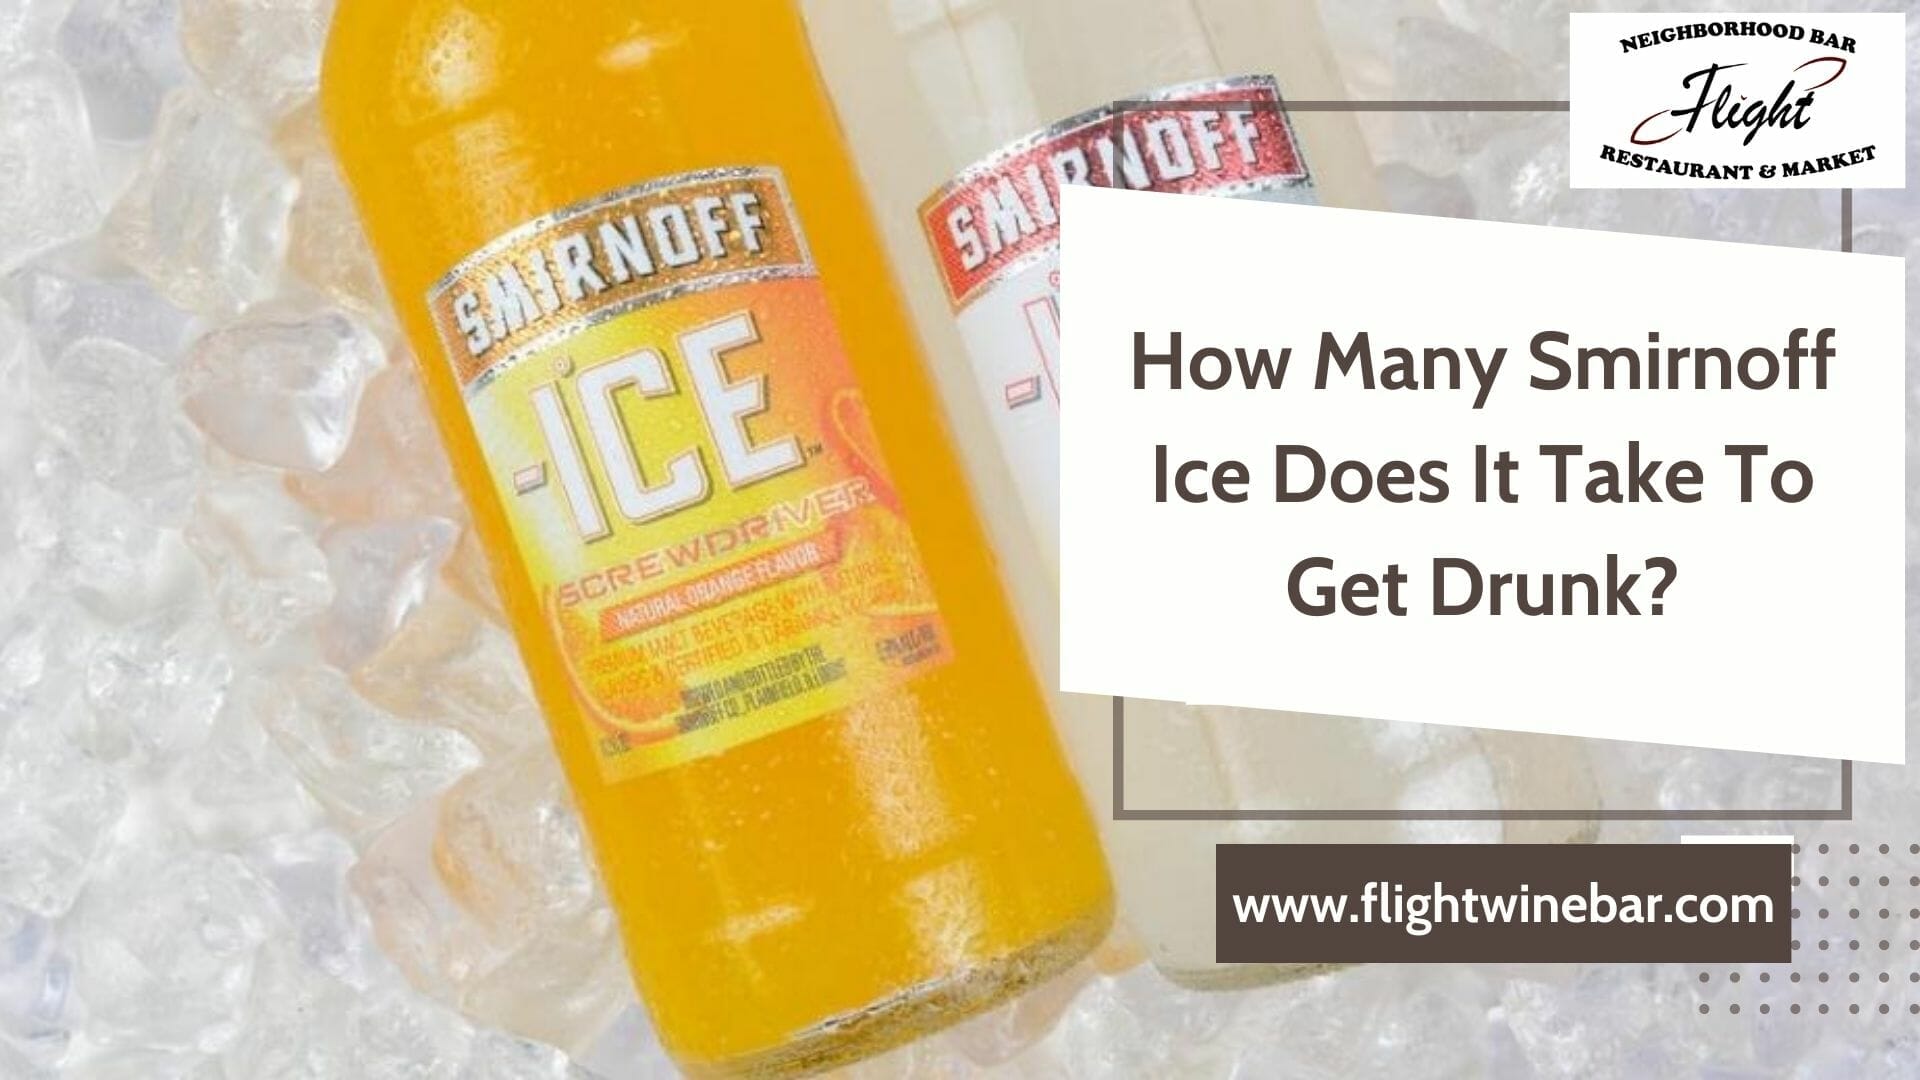 How Many Smirnoff Ice Does It Take To Get Drunk